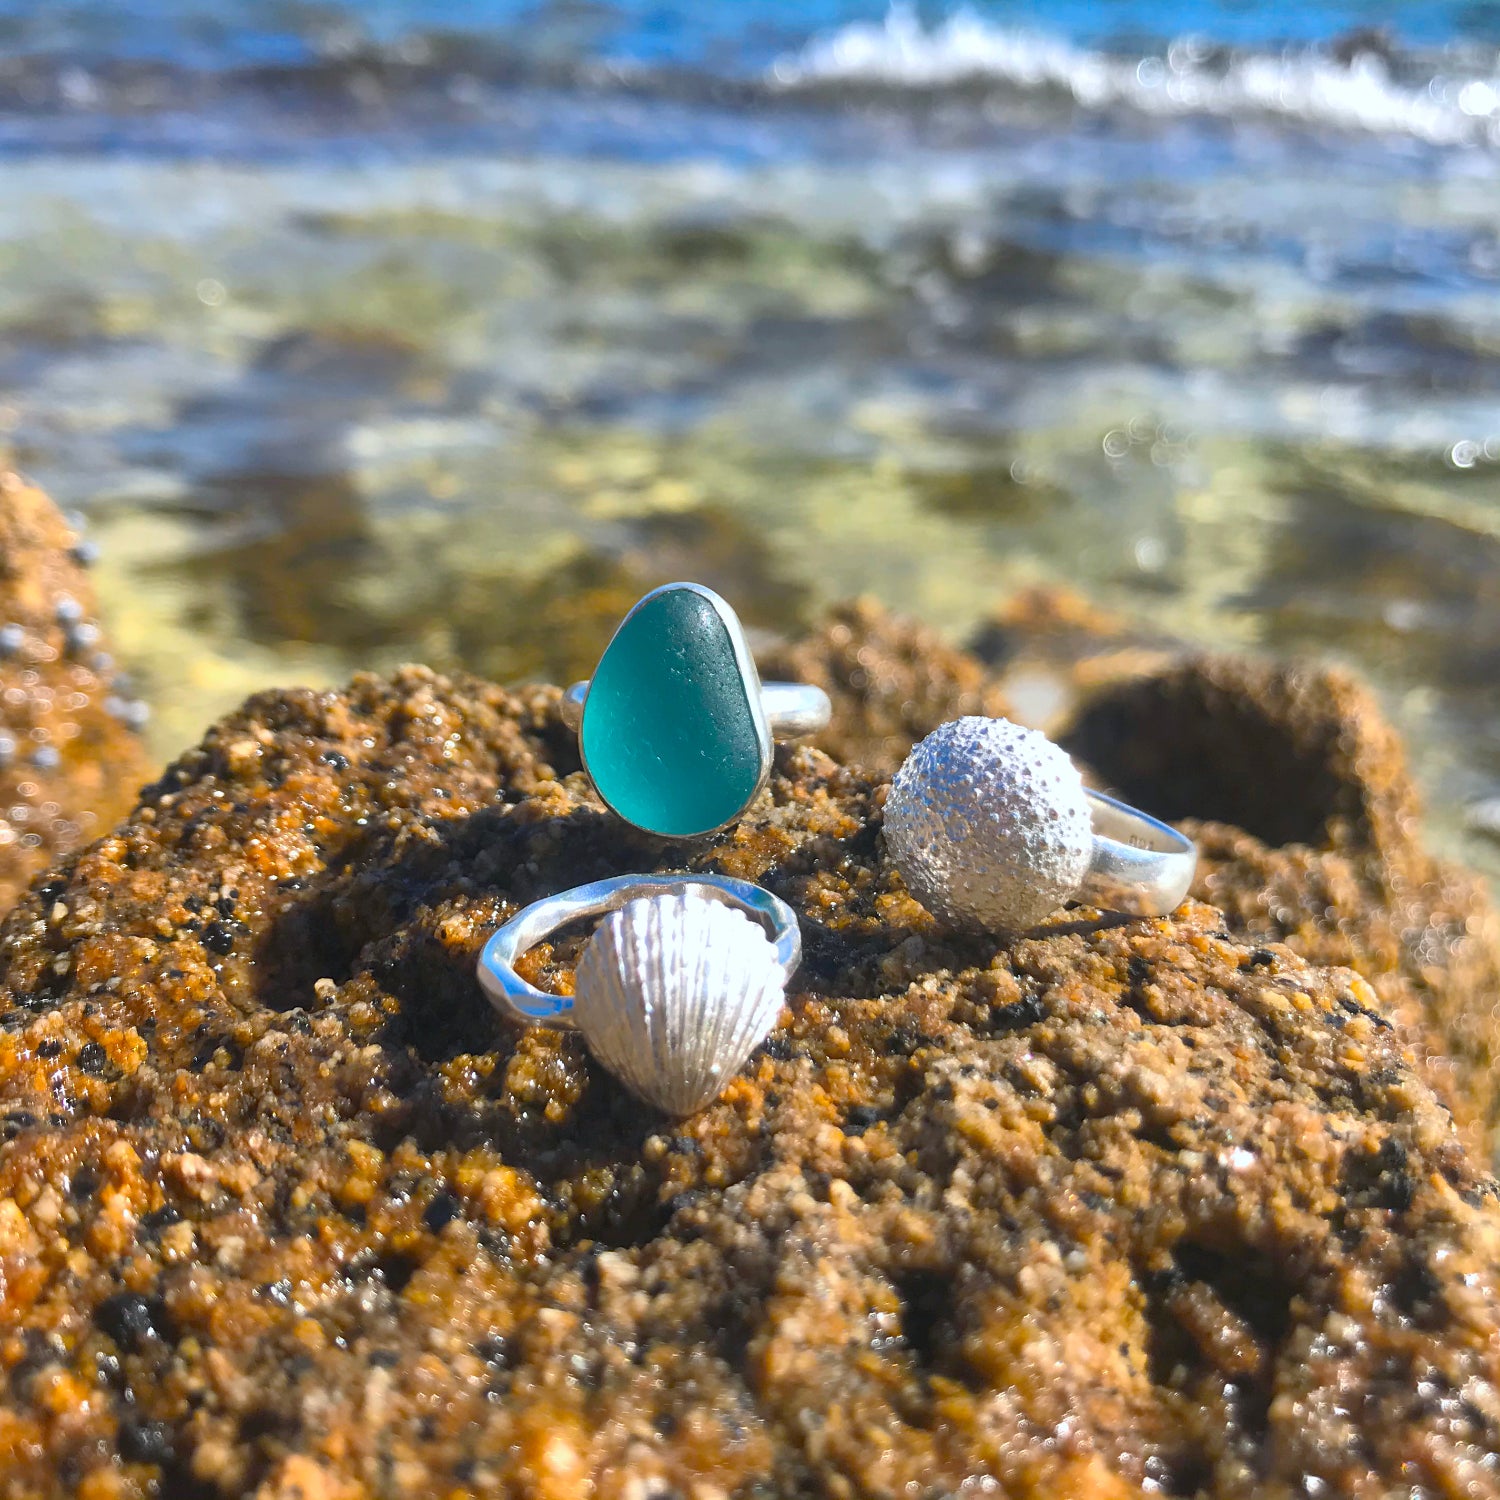 Blue sea glass ring and cast silver shell rings by Mornington Sea Glass. Photographed at the rock pools on the Mornington Peninsula, Victoria, Australia.